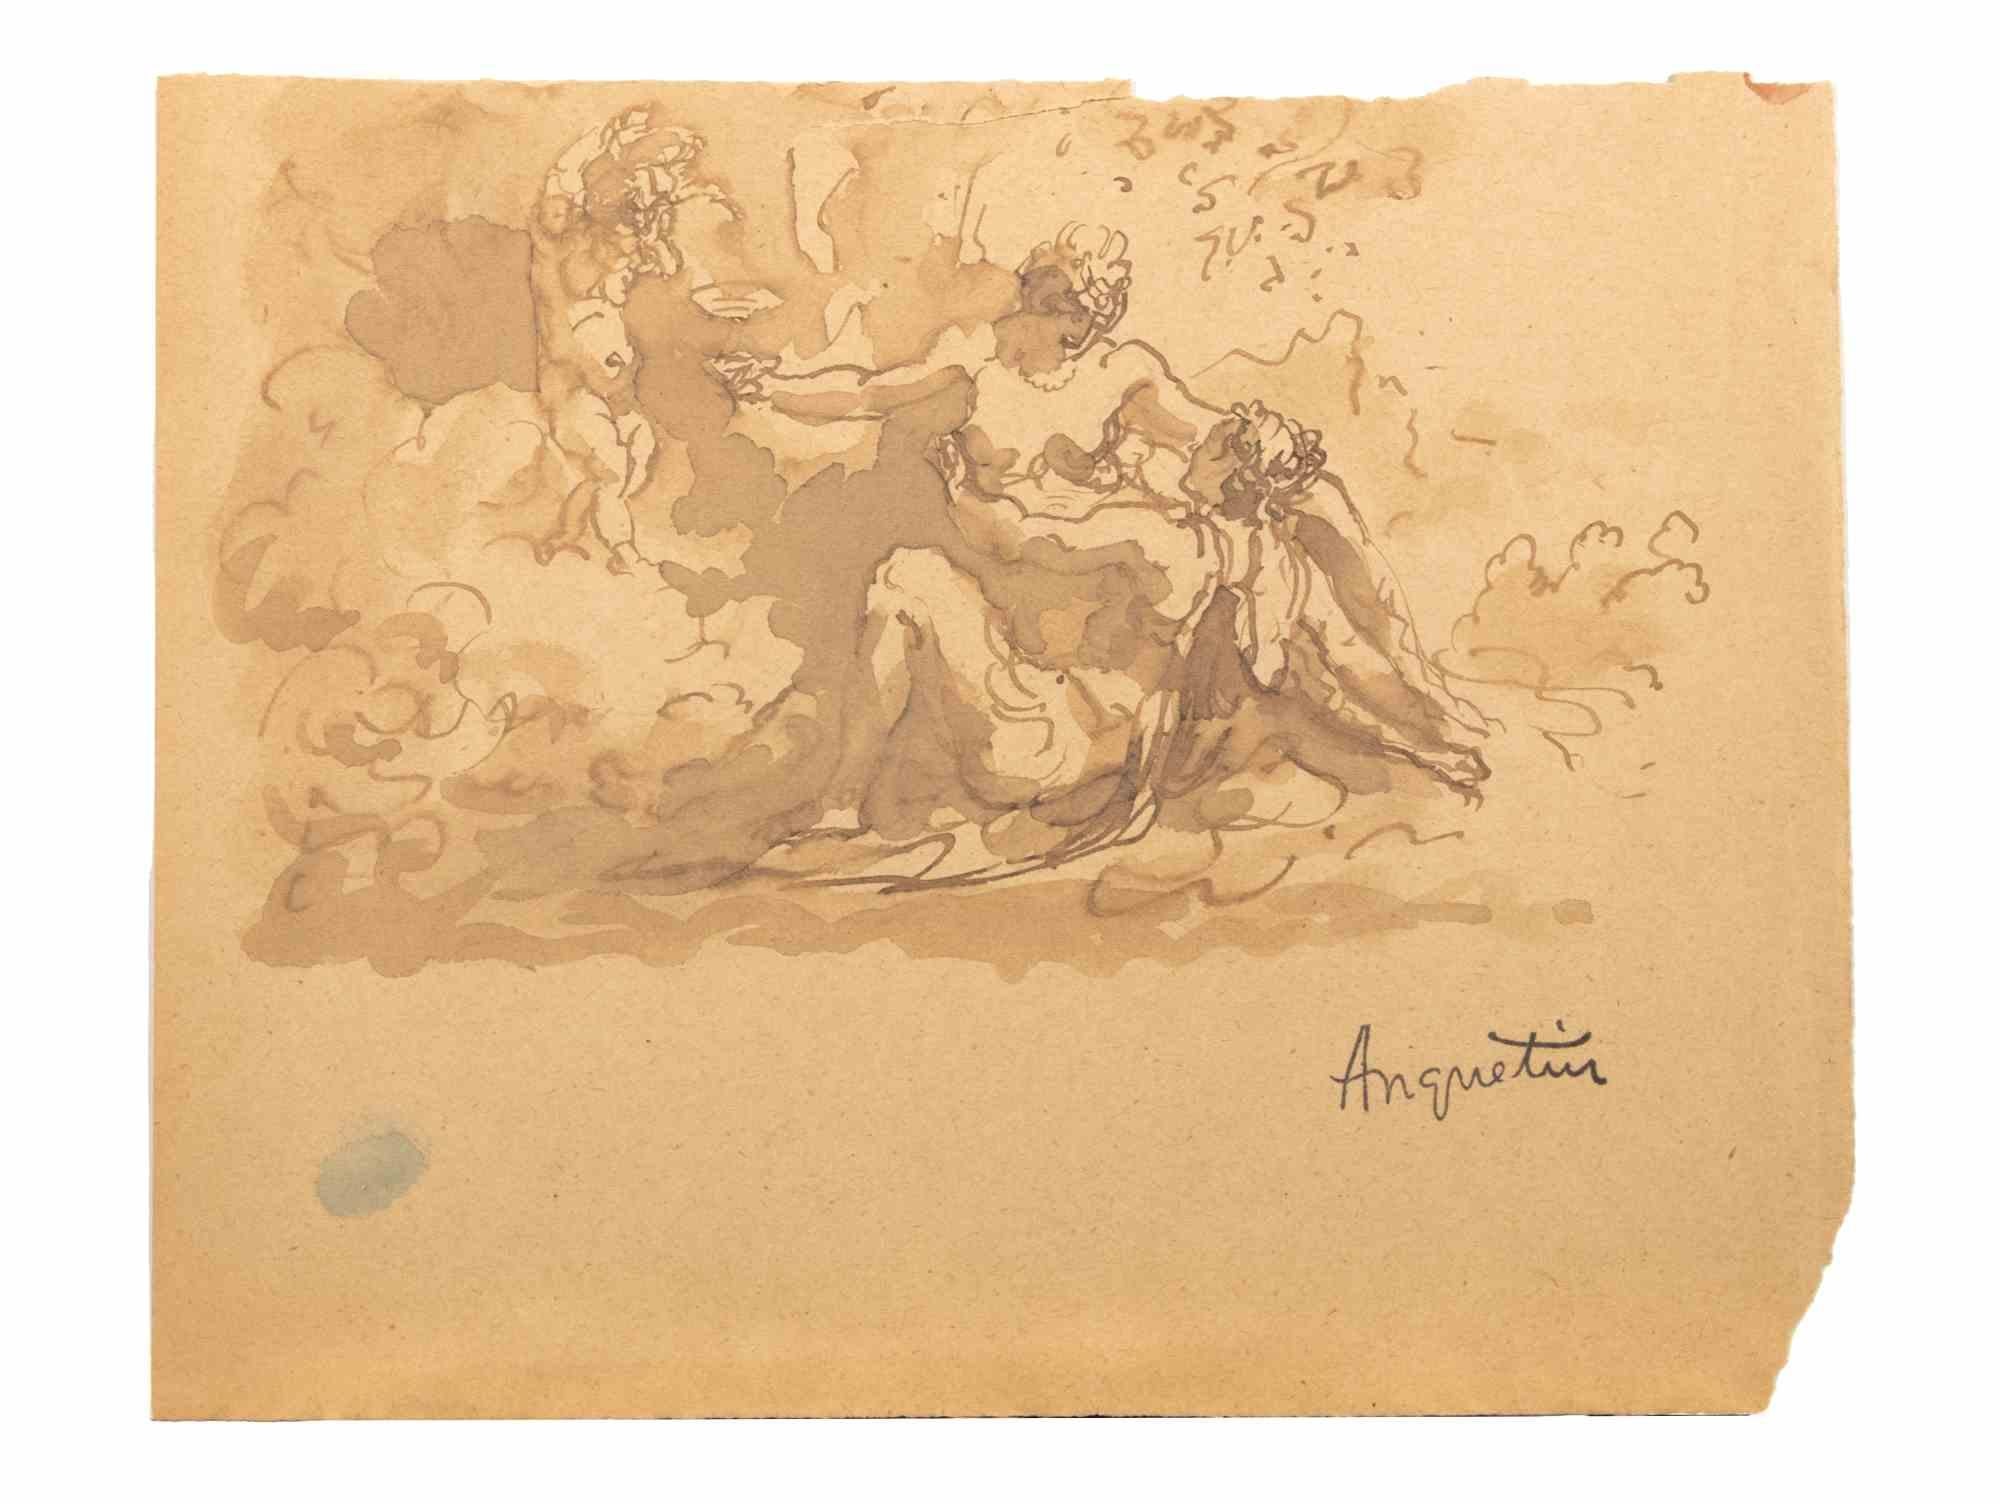 Lovers is an ink and pencil drawing on paper realized in the early 20th Century by Louis Anquetin (1861-1932).

Hand-signed on the lower.

Good condition.

Louis Émile Anquetin (26 January 1861 – 19 August 1932) was a French painter. In 1882 he came